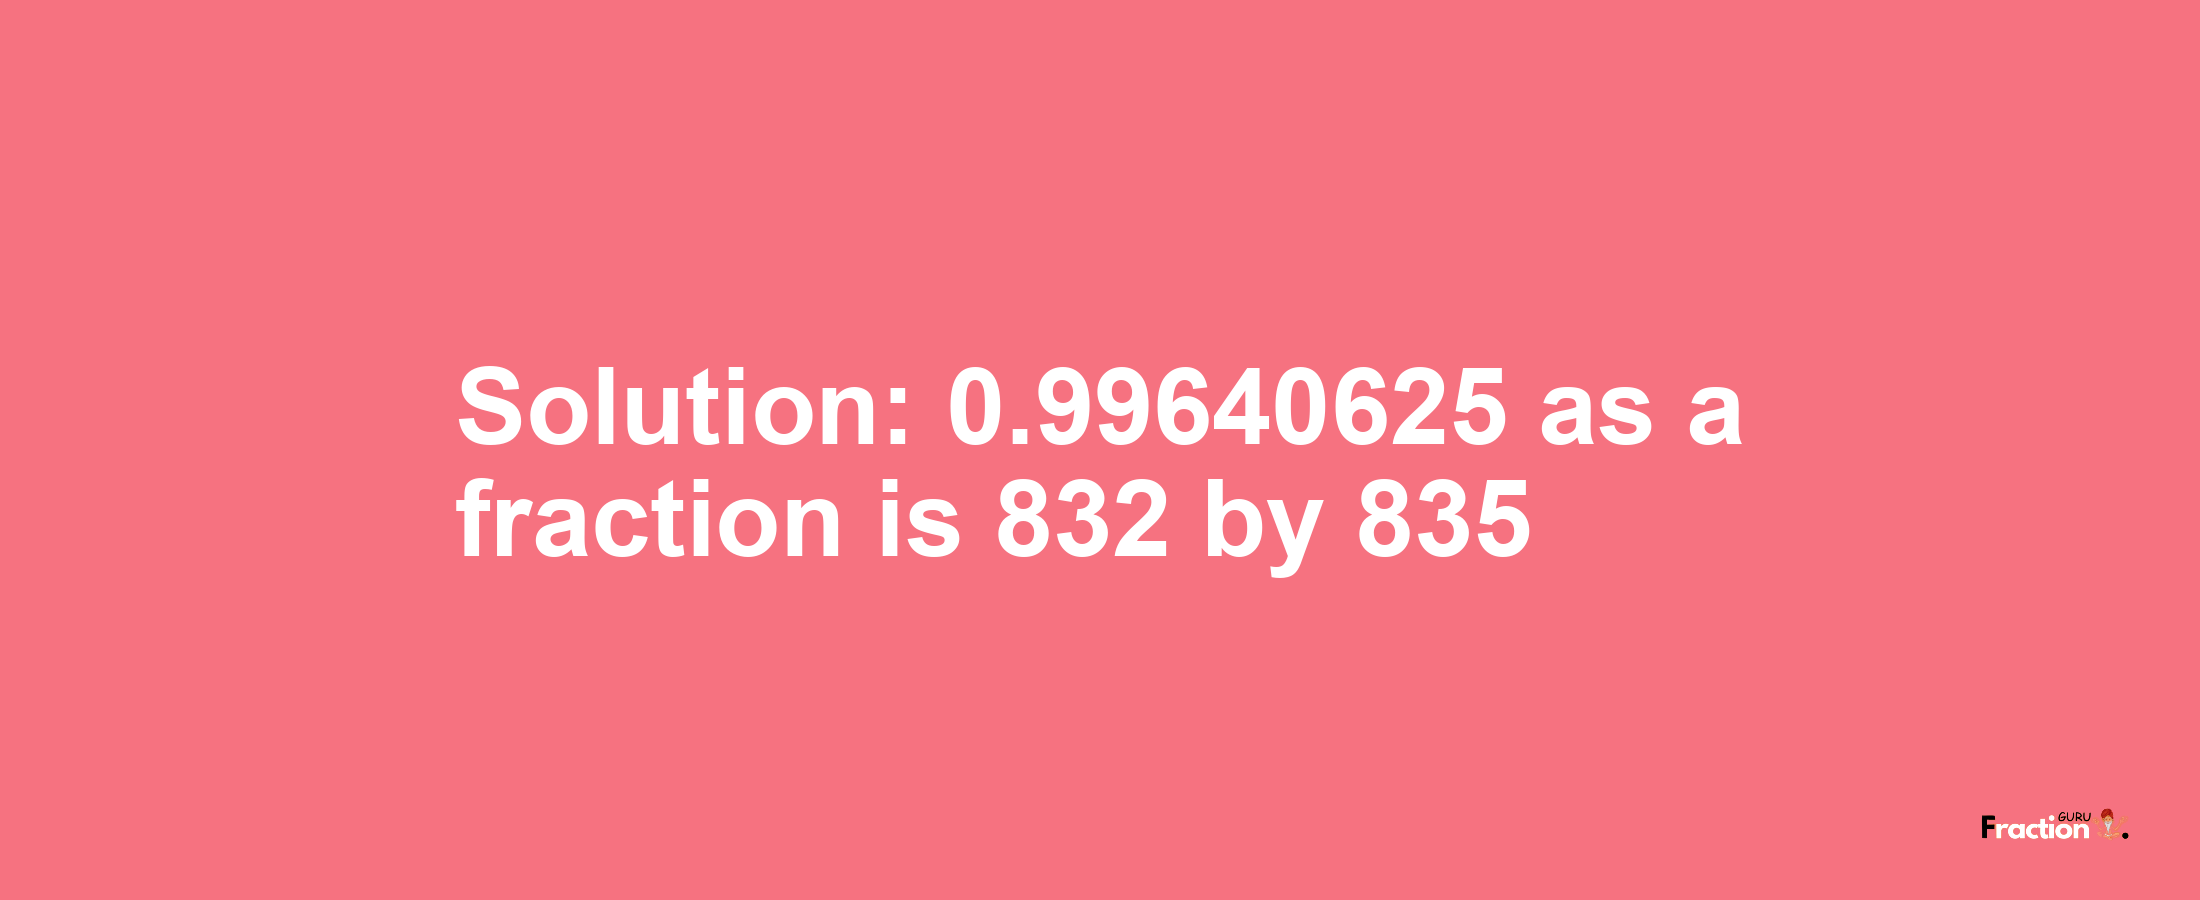 Solution:0.99640625 as a fraction is 832/835